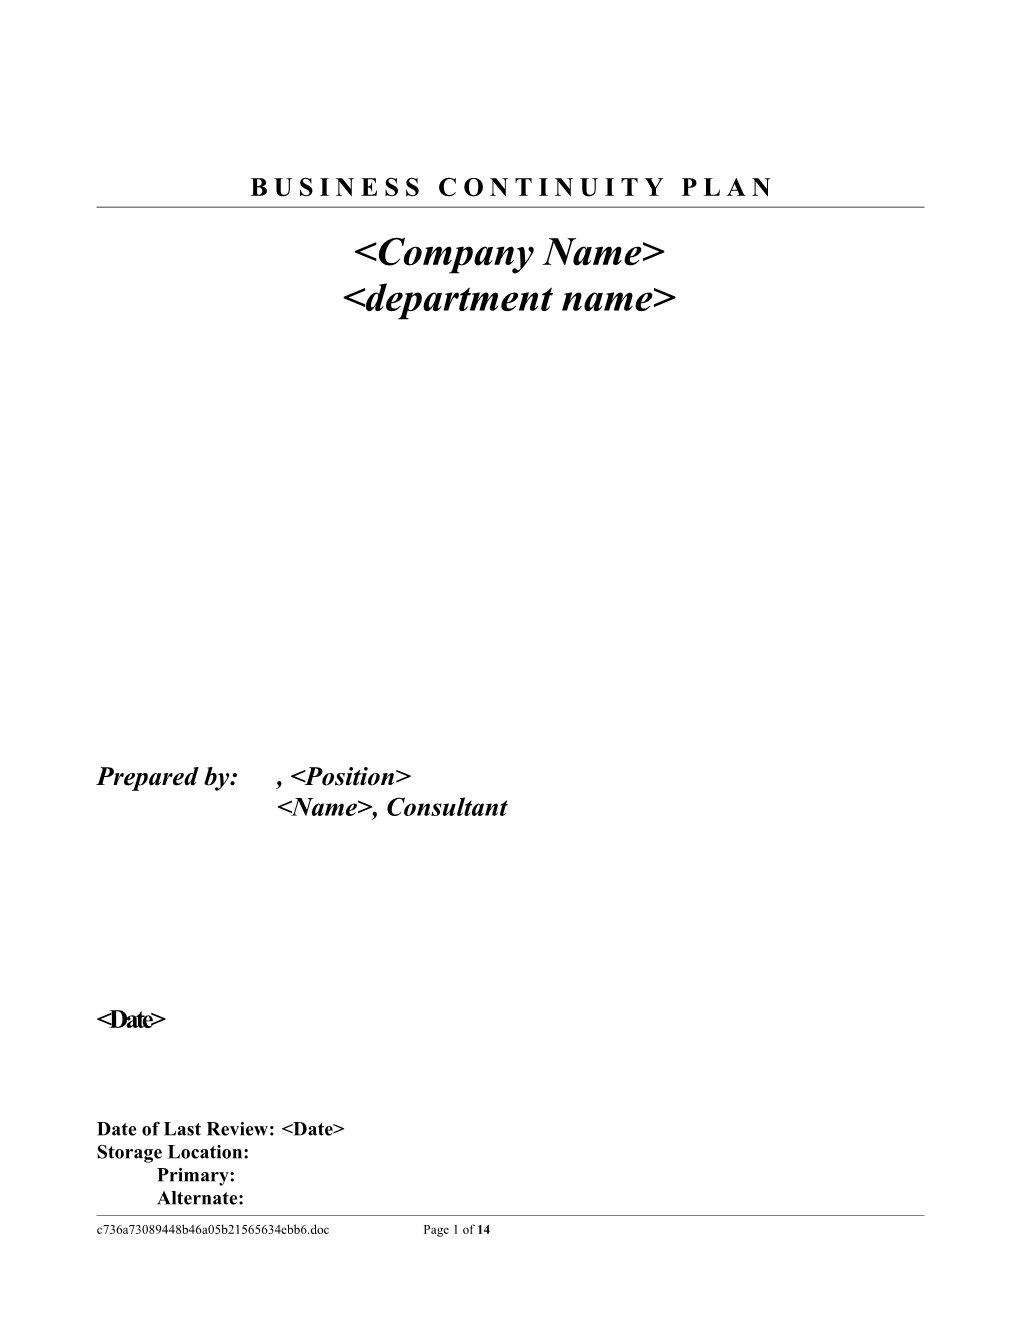 Business-Continuity-Plan-Template-Example